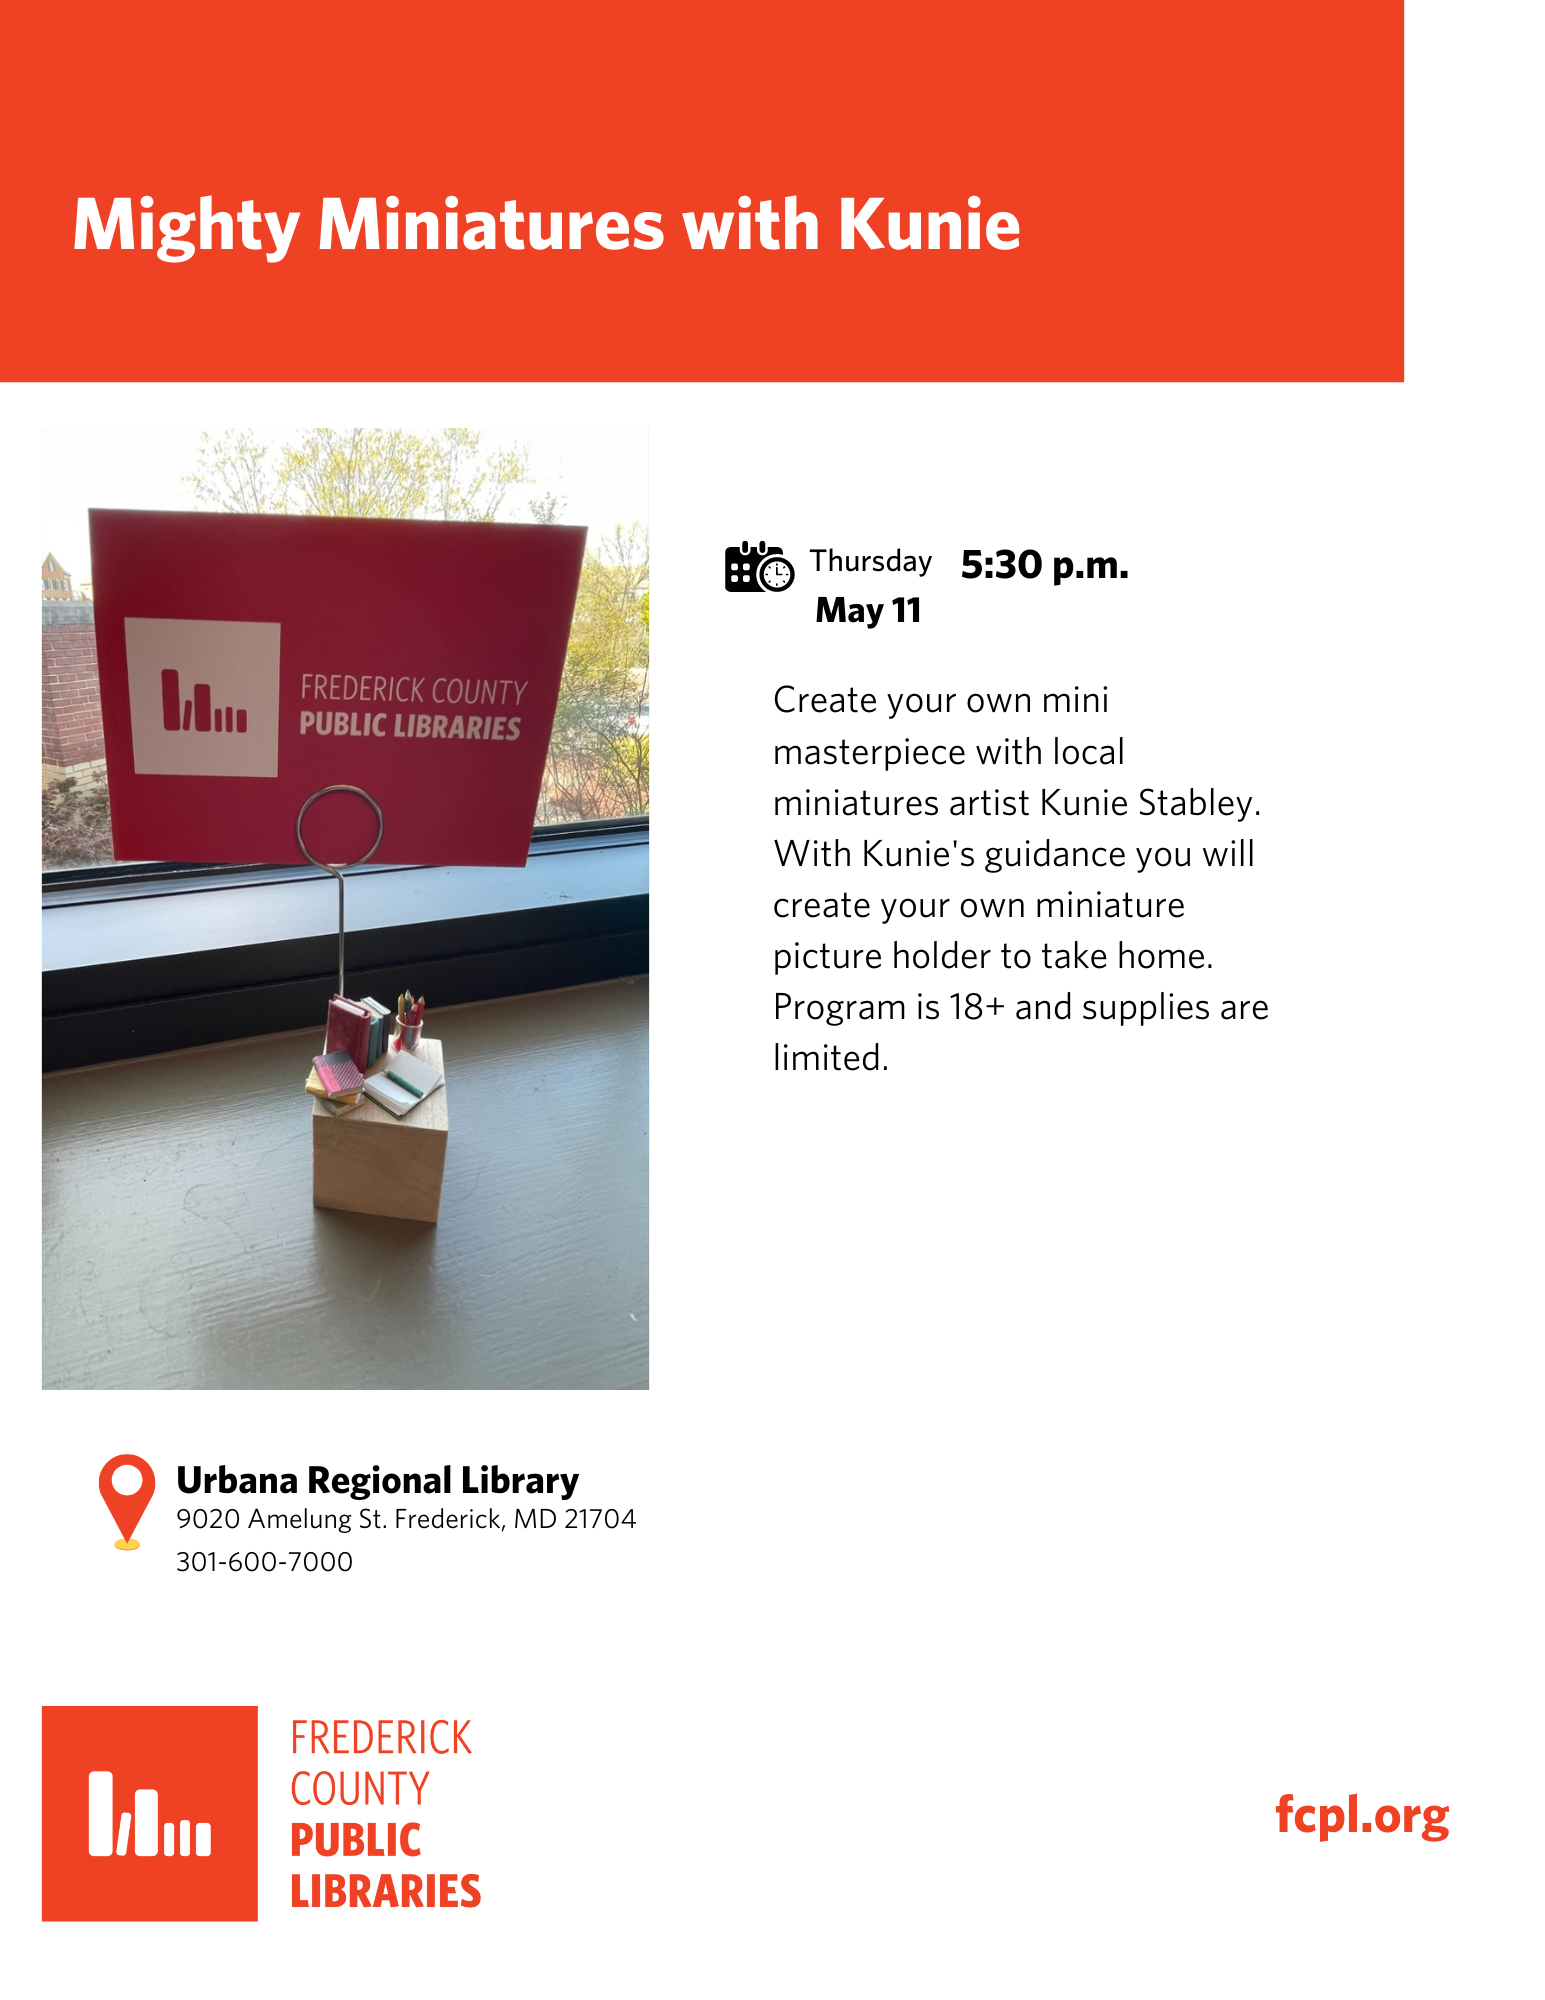 Miniature Picture Holder, Thursday May 11 at 5:30pm 